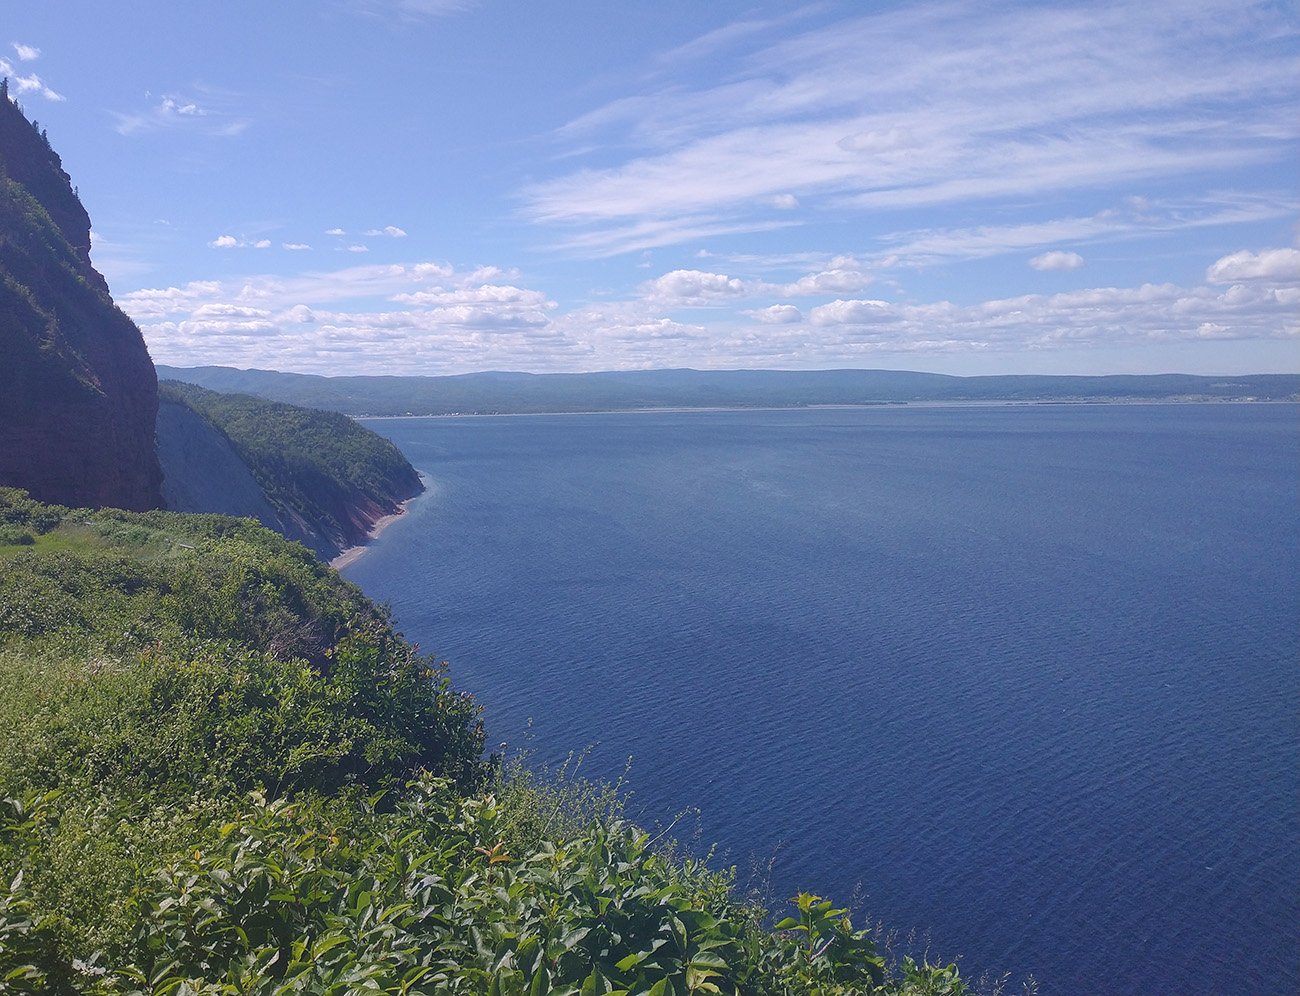 This is the lookout on the 132 road as you get to Perce from the north